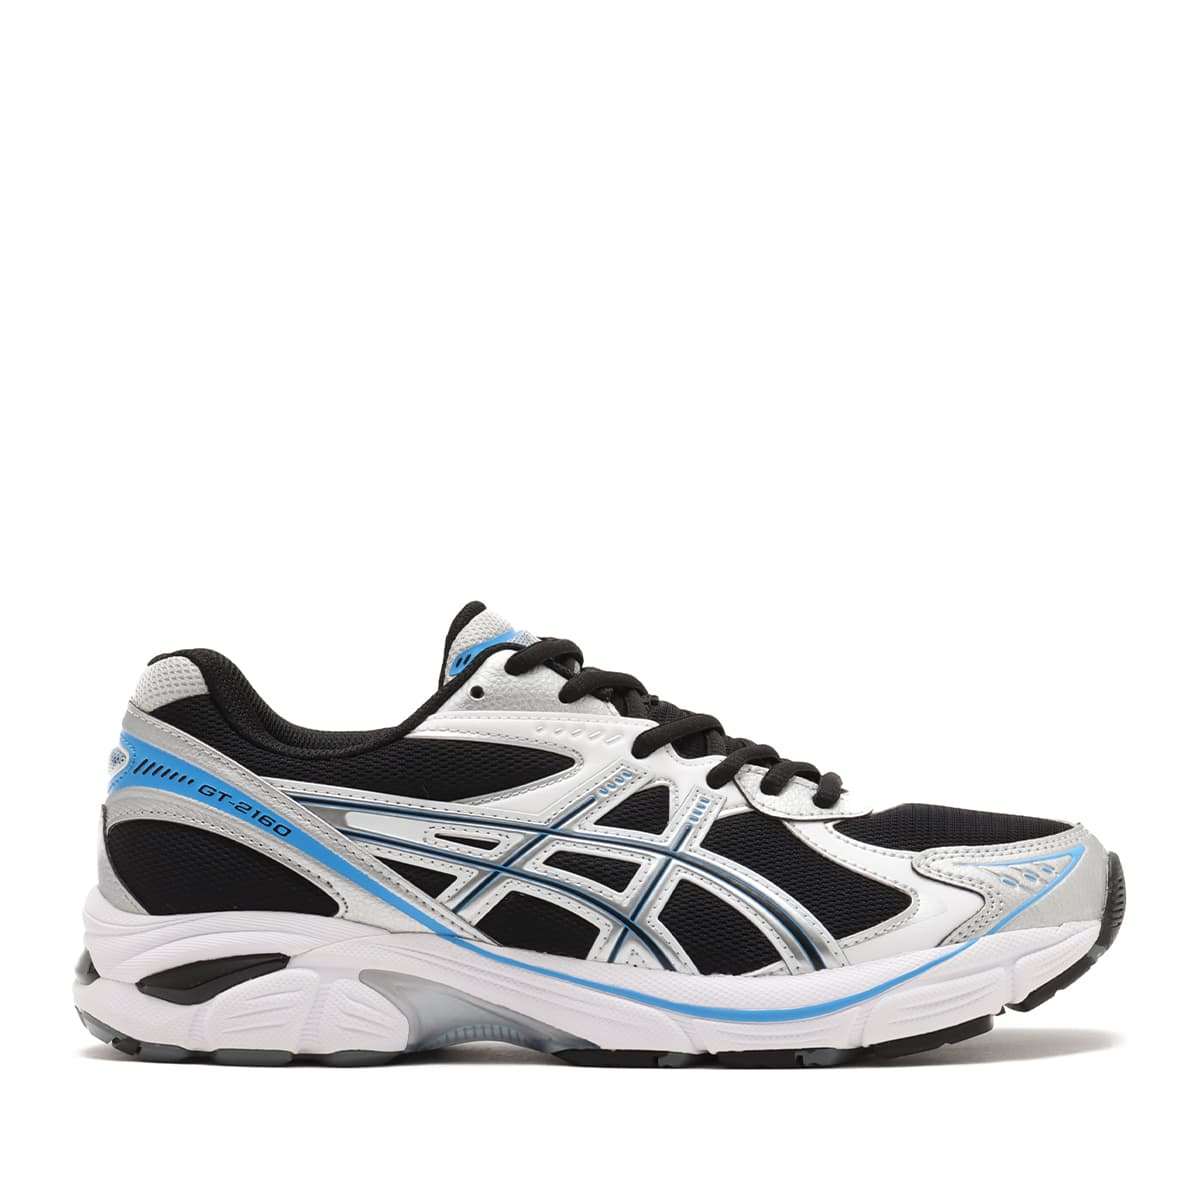 asics GT-2160 BLACK/PURE SILVER 24SS-I